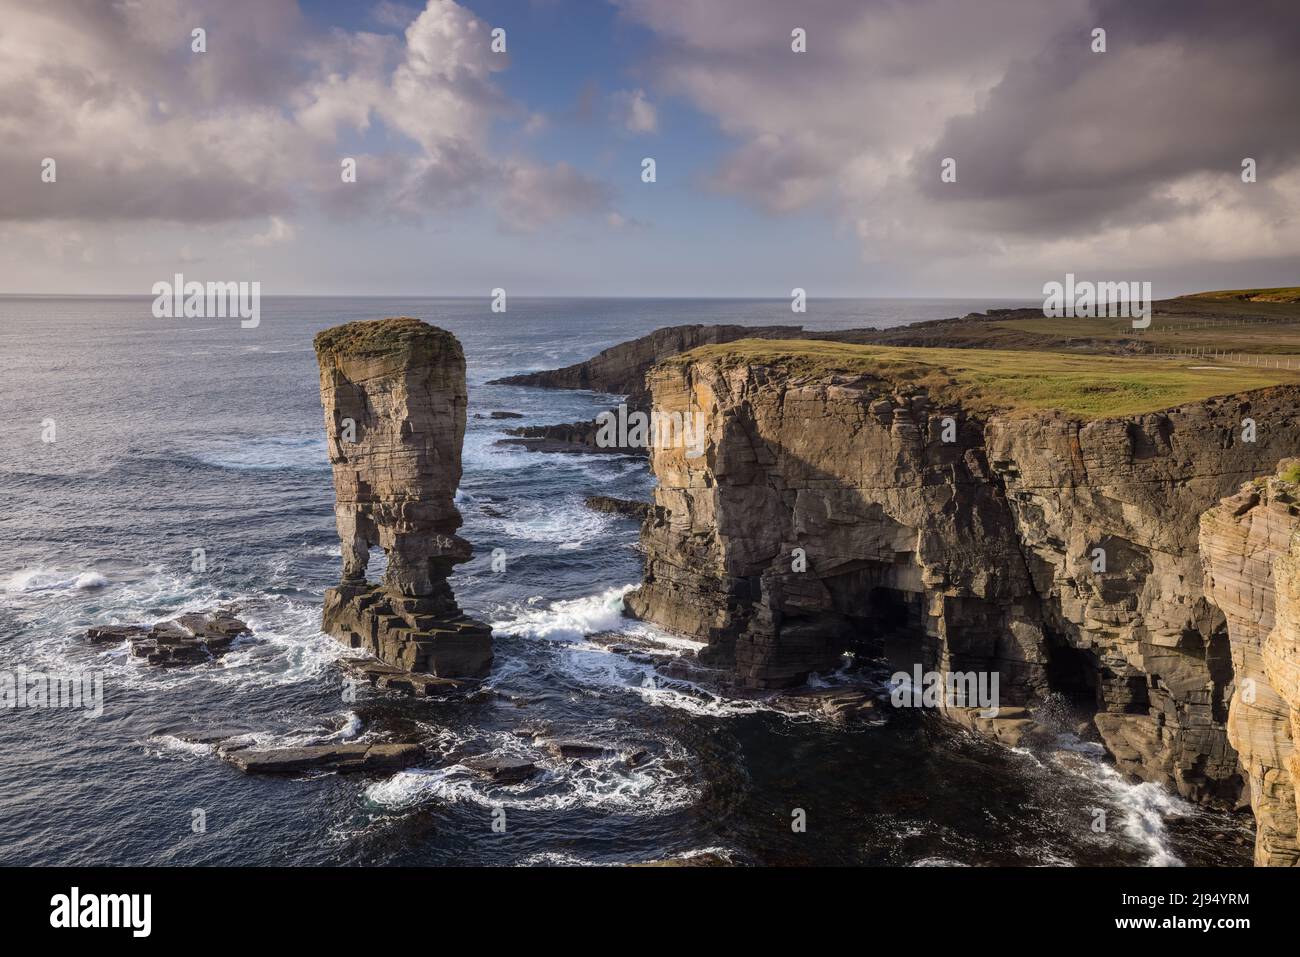 The sea stack and cliffs at Yesnaby, Mainland, Orkney Isles, Scotland, UK Stock Photo